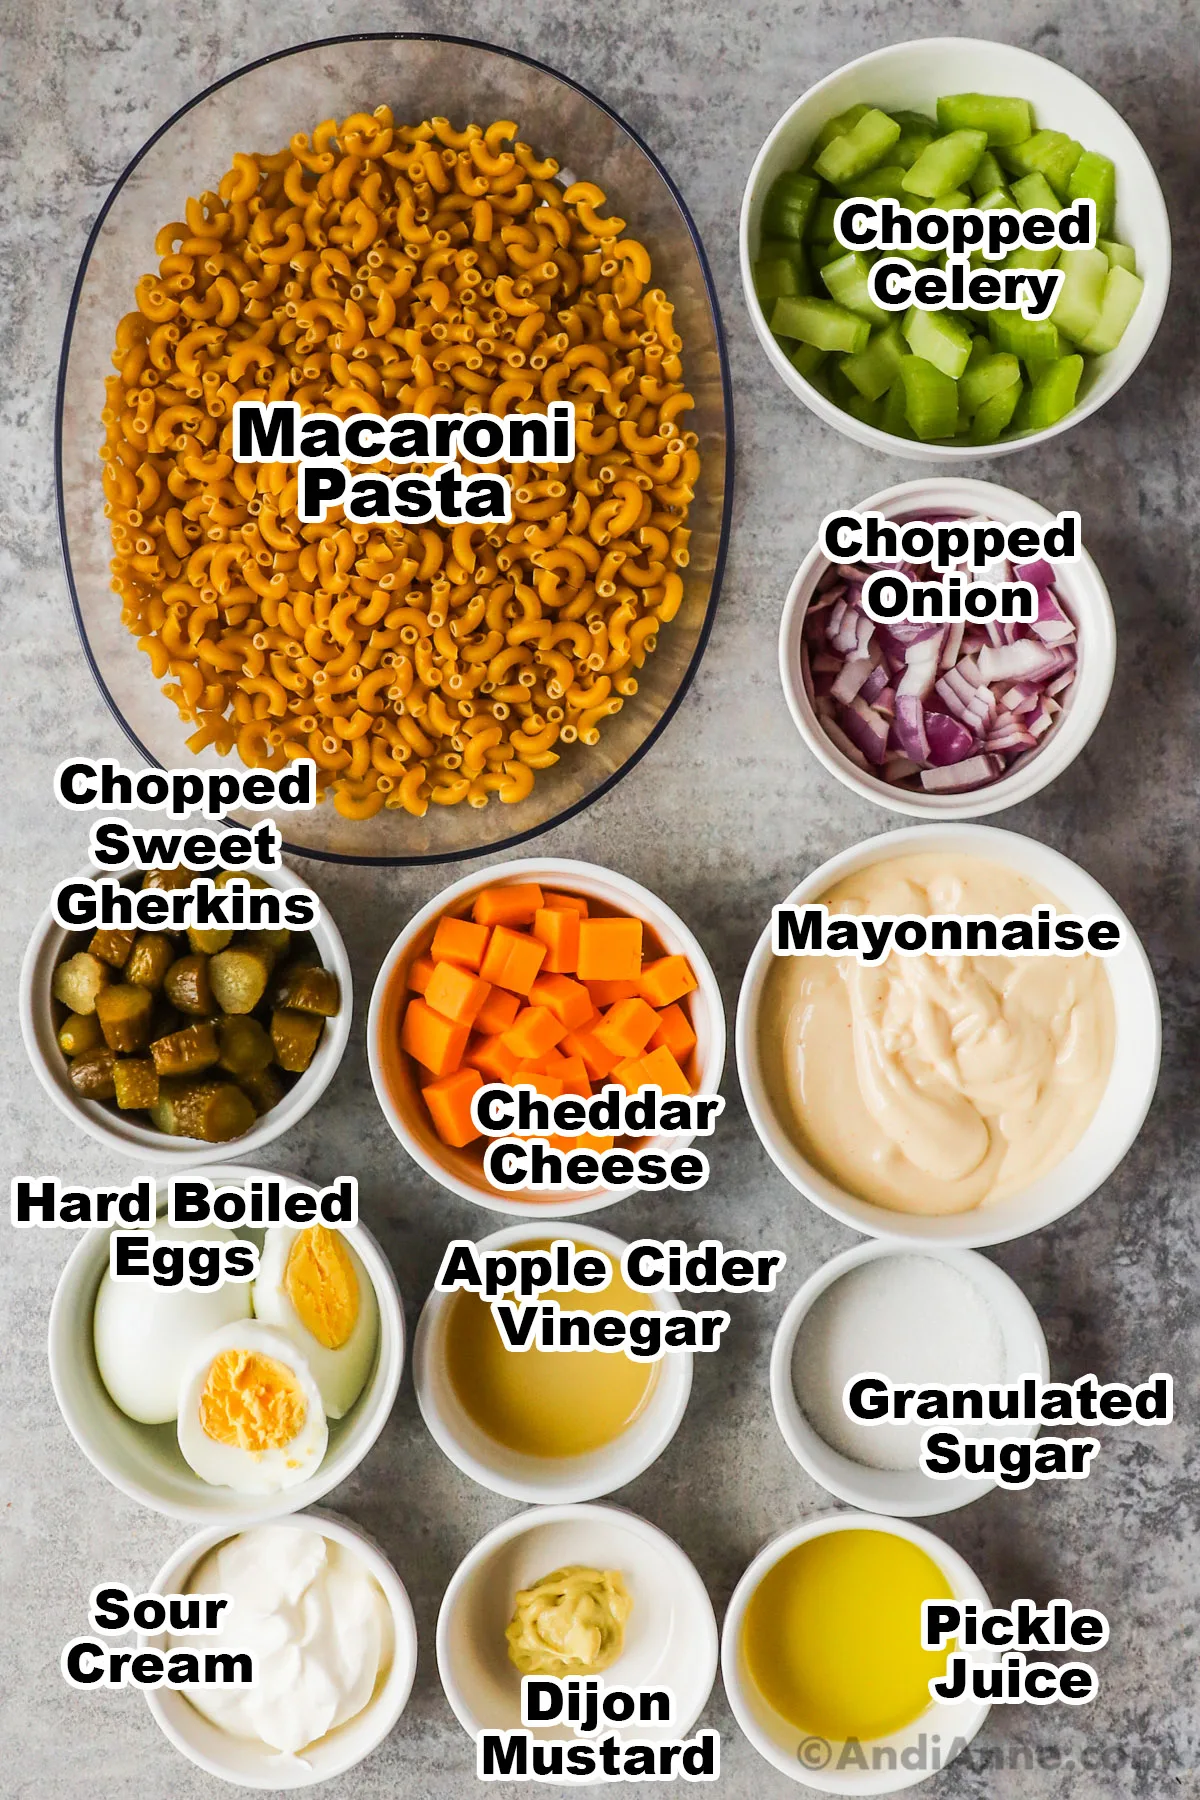 Recipe ingredients in bowls including chopped celery, onion, pickles, cheese, mayonnaise, macaroni pasta, hard boiled eggs, sour cream, sugar and pickle juice.